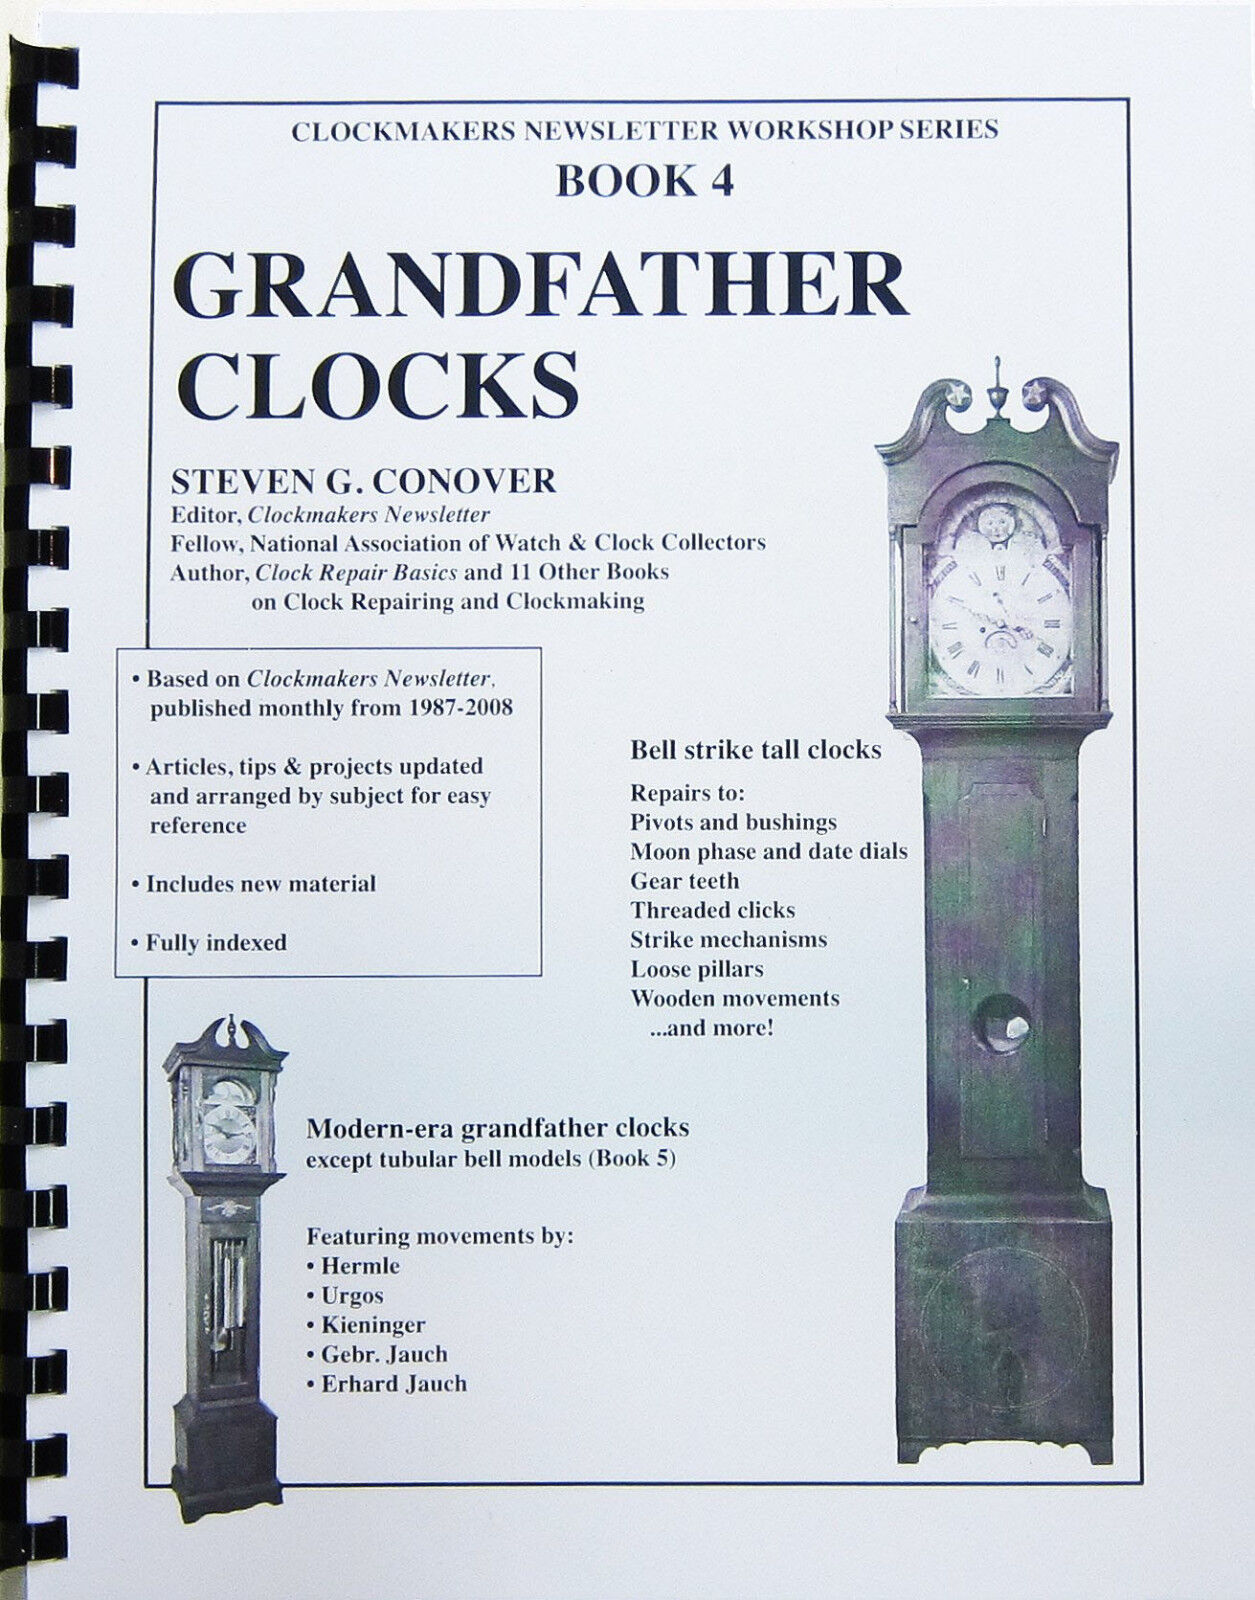 Grandfather Clocks: Book 4 in Workshop Series by Steven Conover (BK-121)